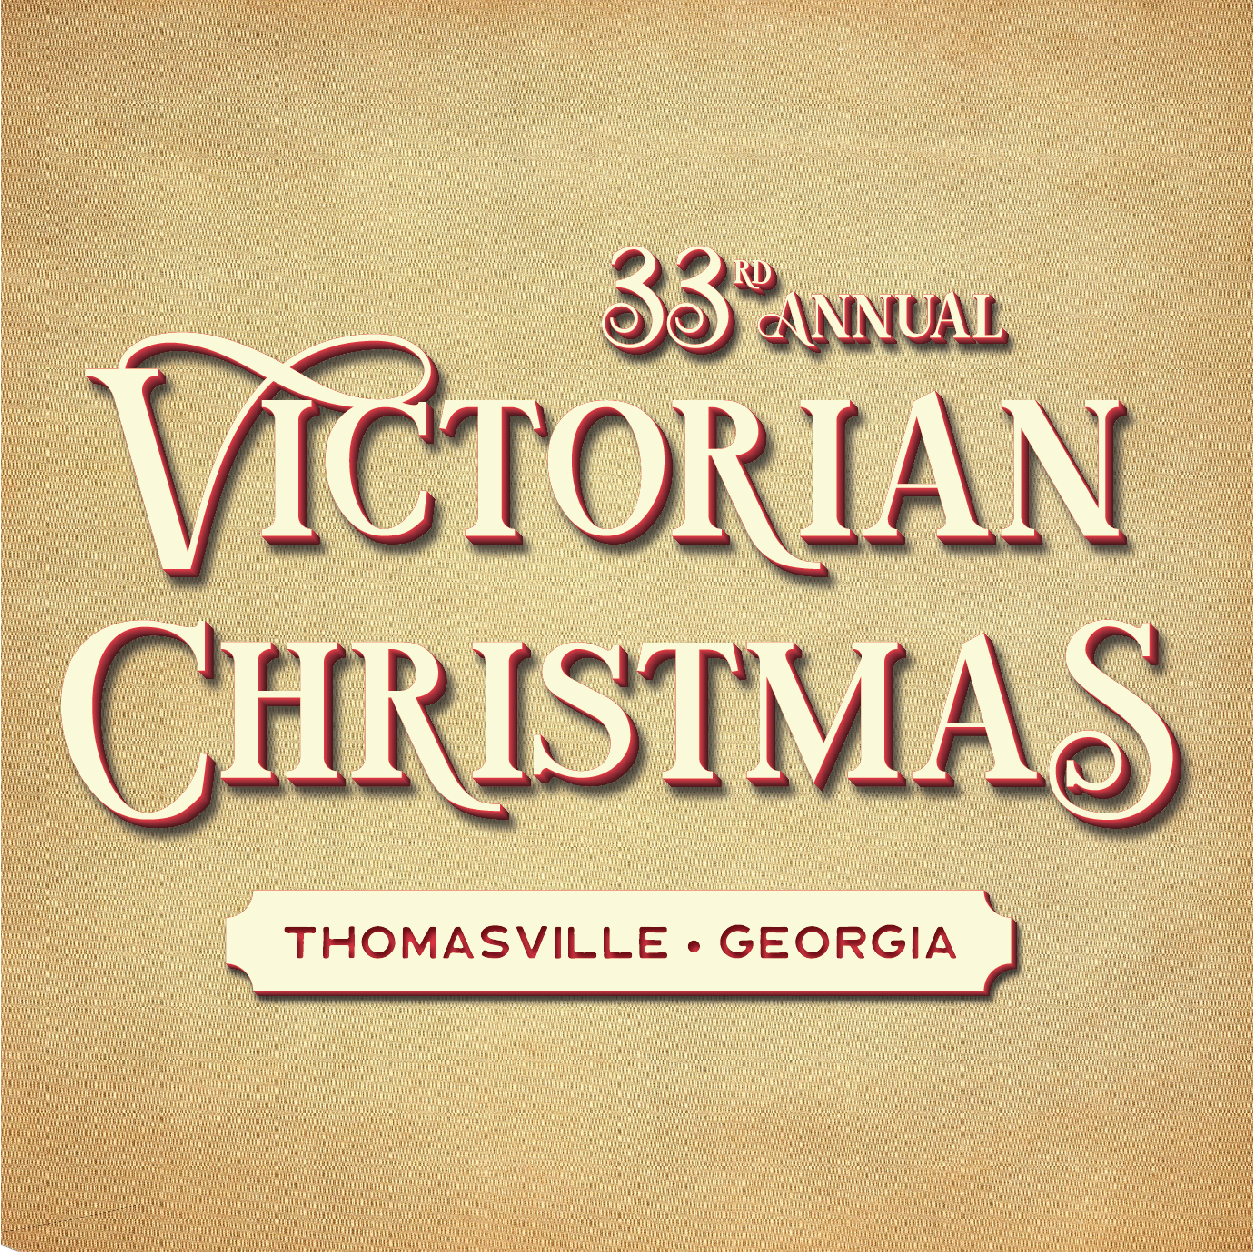 Photo for VICTORIAN CHRISTMAS CONTINUES TONIGHT, RAIN OR SHINE